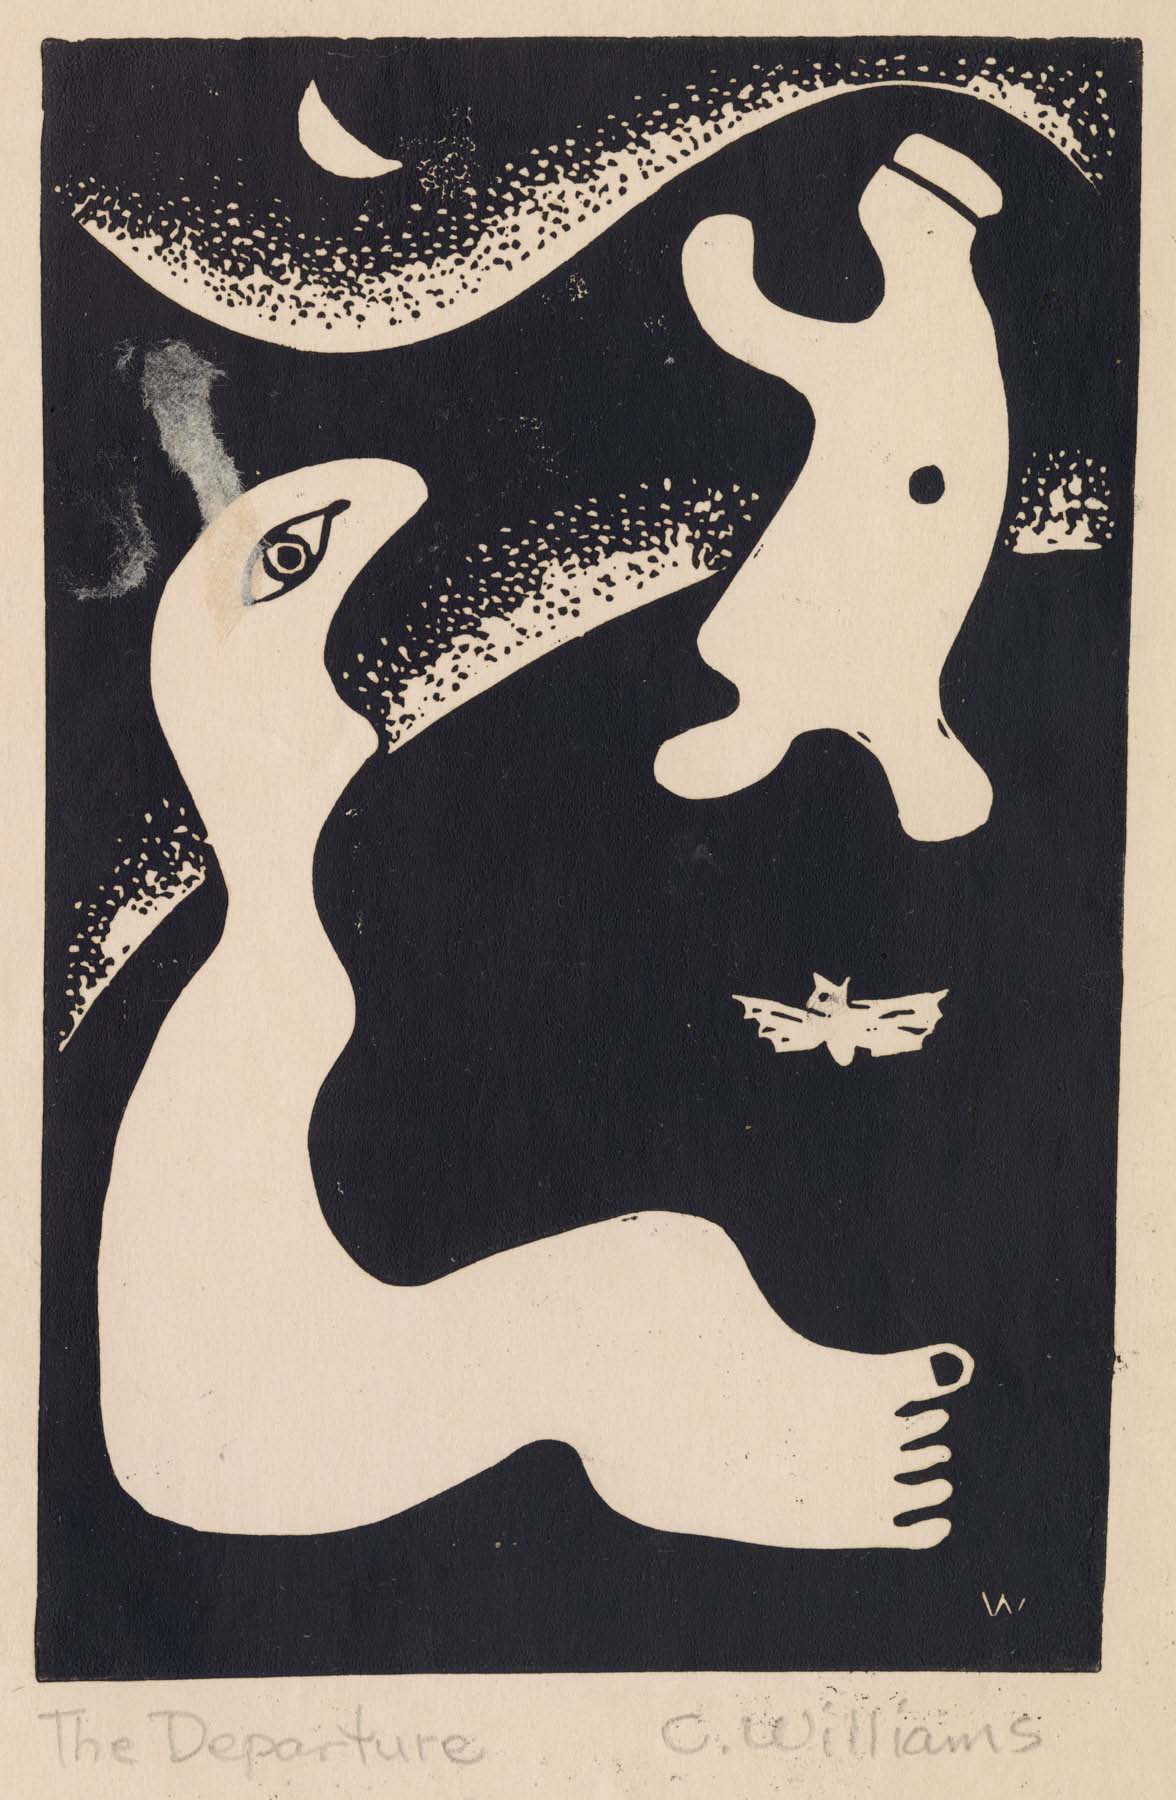 A black-and-white print of an abstract seated figure, a bat, and a standing figure under a crescent moon.